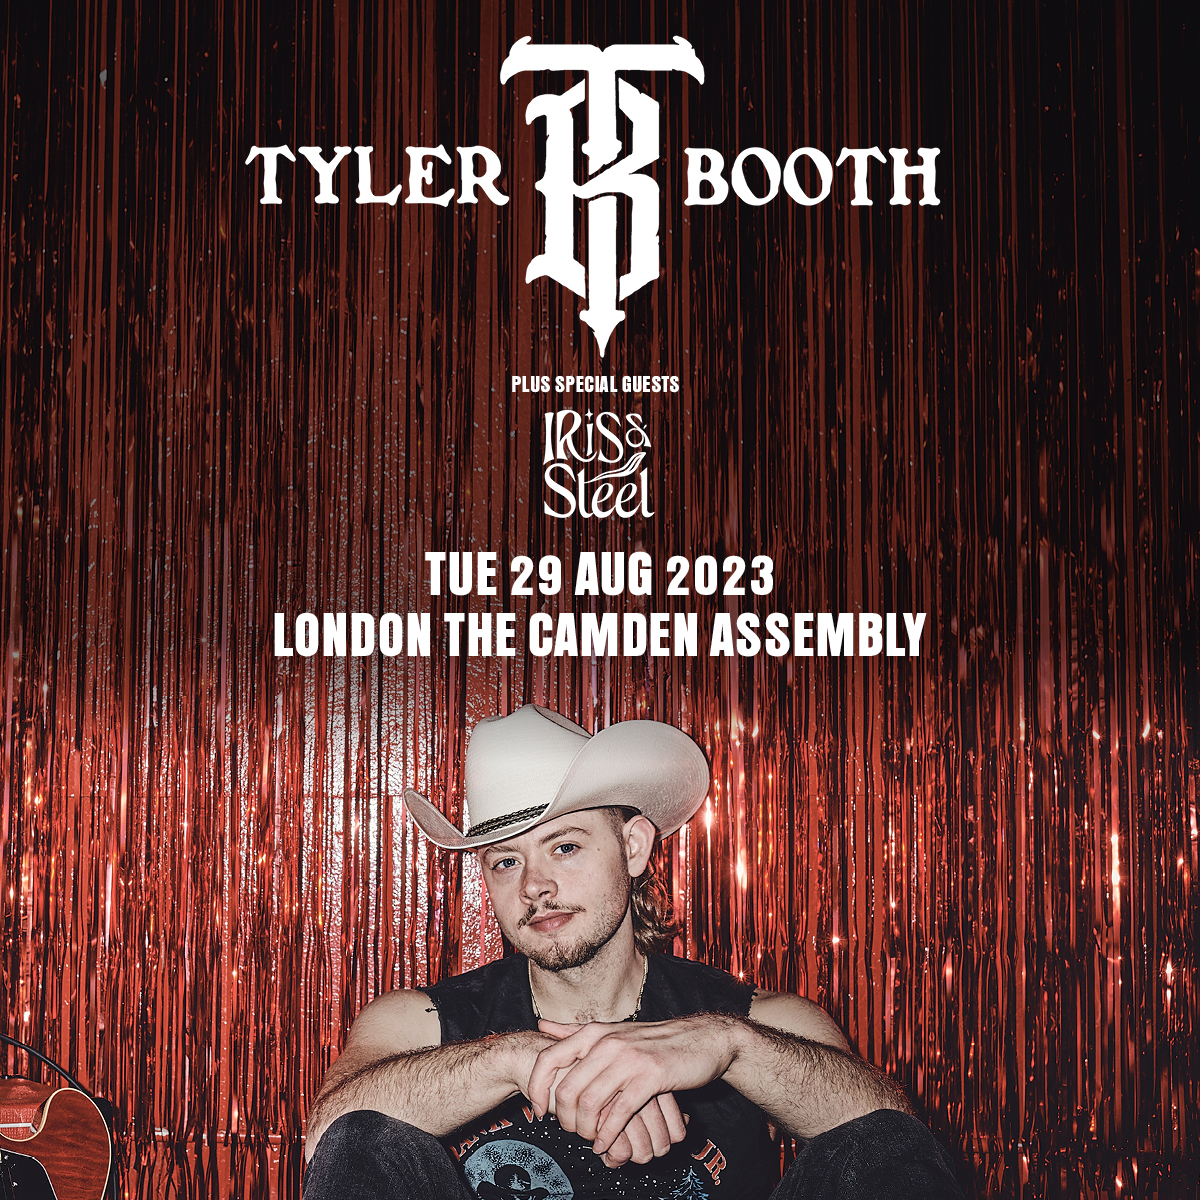 Tonight! American country music singer-songwriter @tylerbooth88142 Joins us at Camden Assembly! Get those advance tickets on the link. 🎟️ Tickets: bit.ly/3Z2wxbR